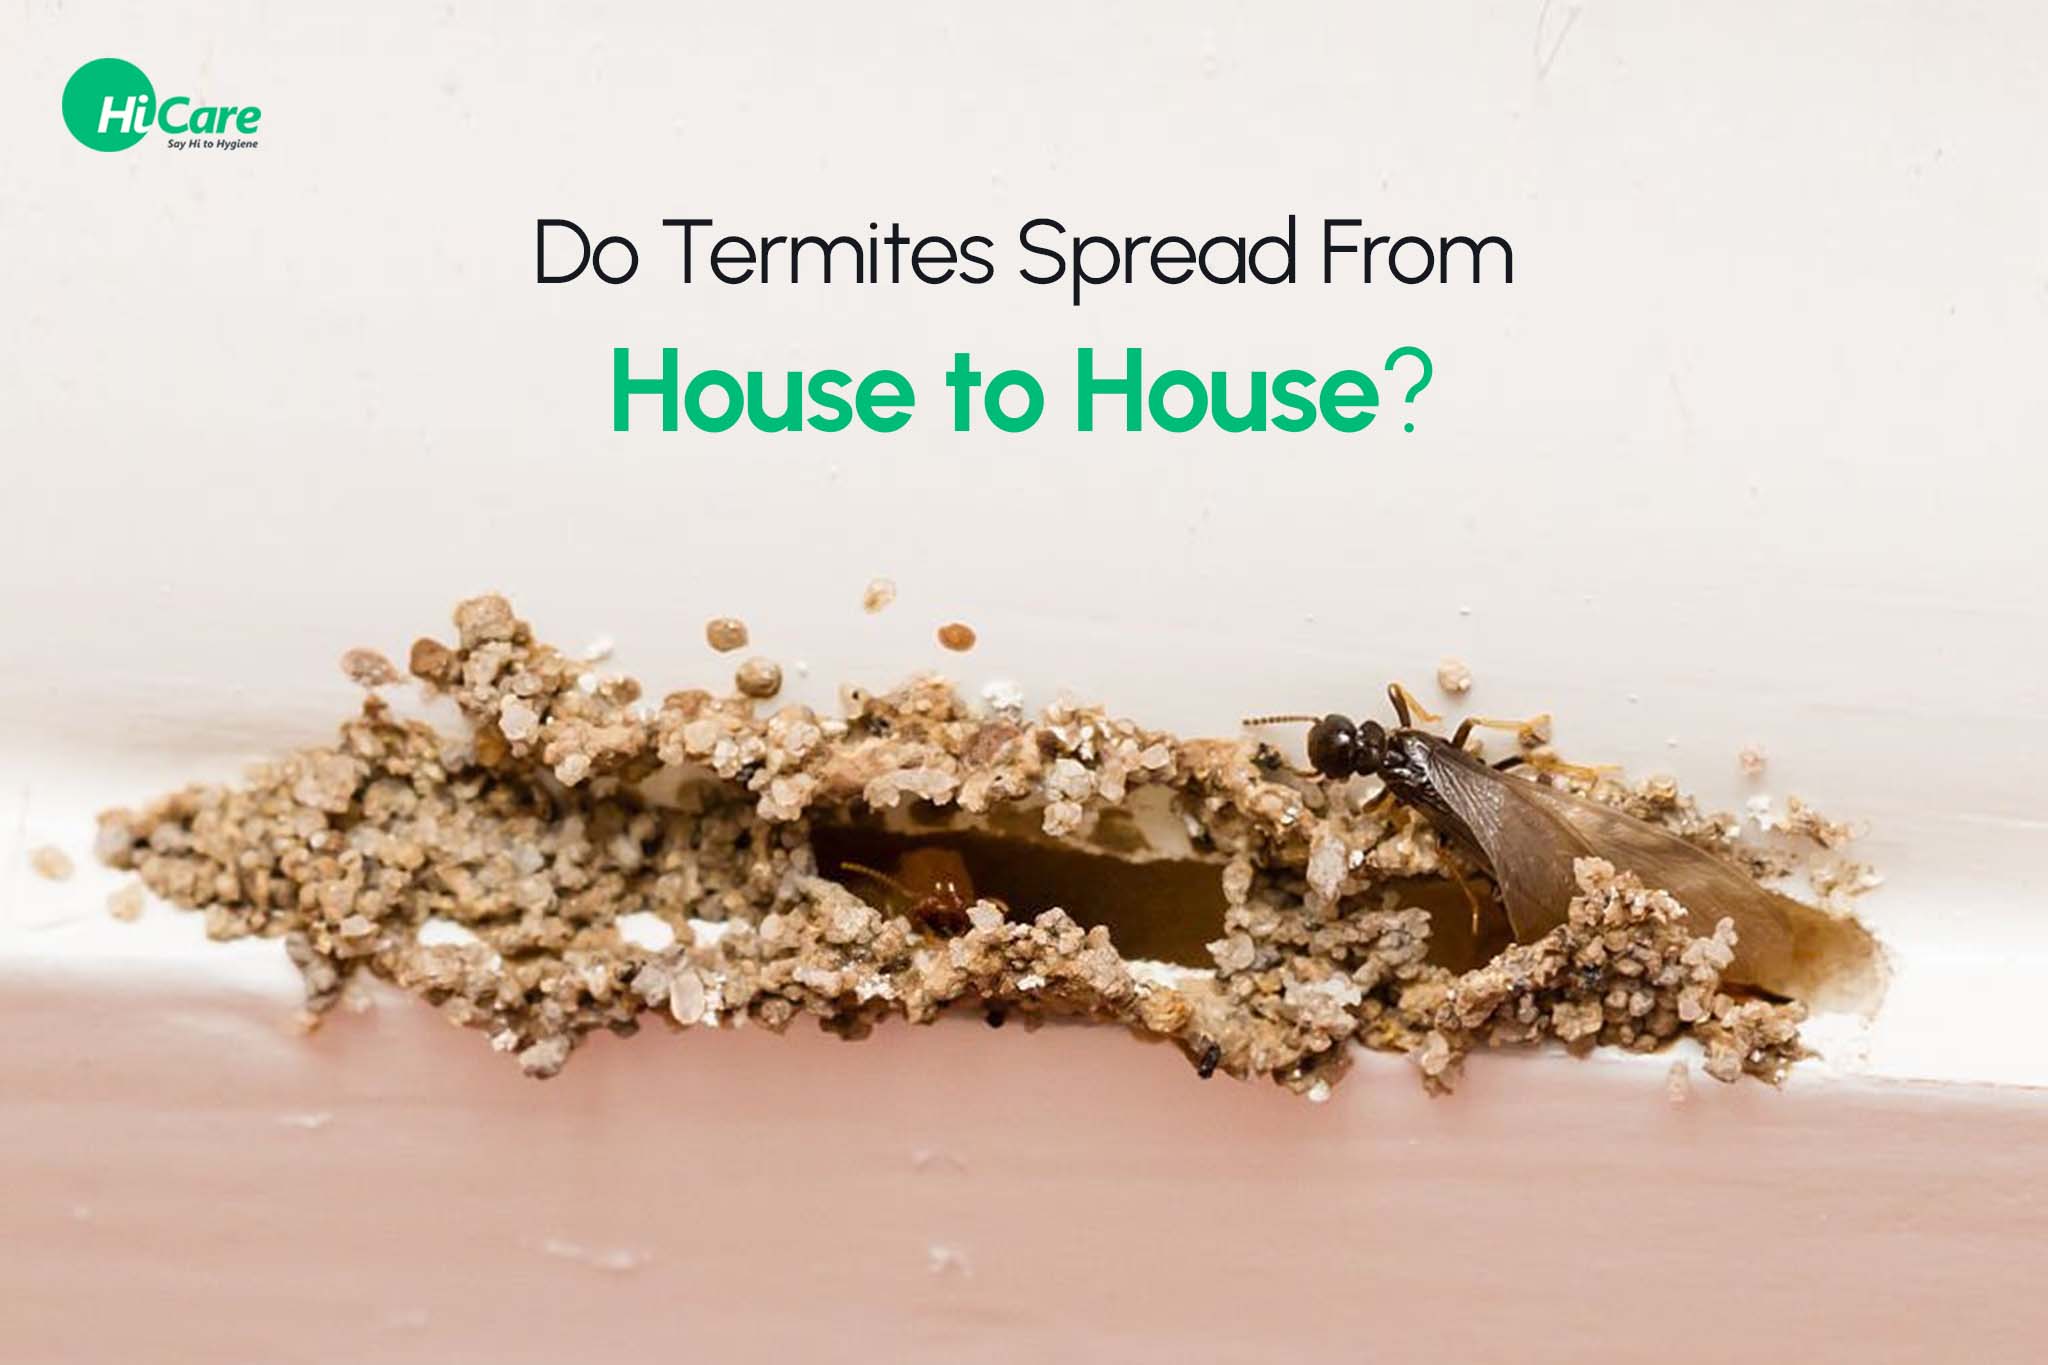 How do Termites Spread from House to House | Hi Care